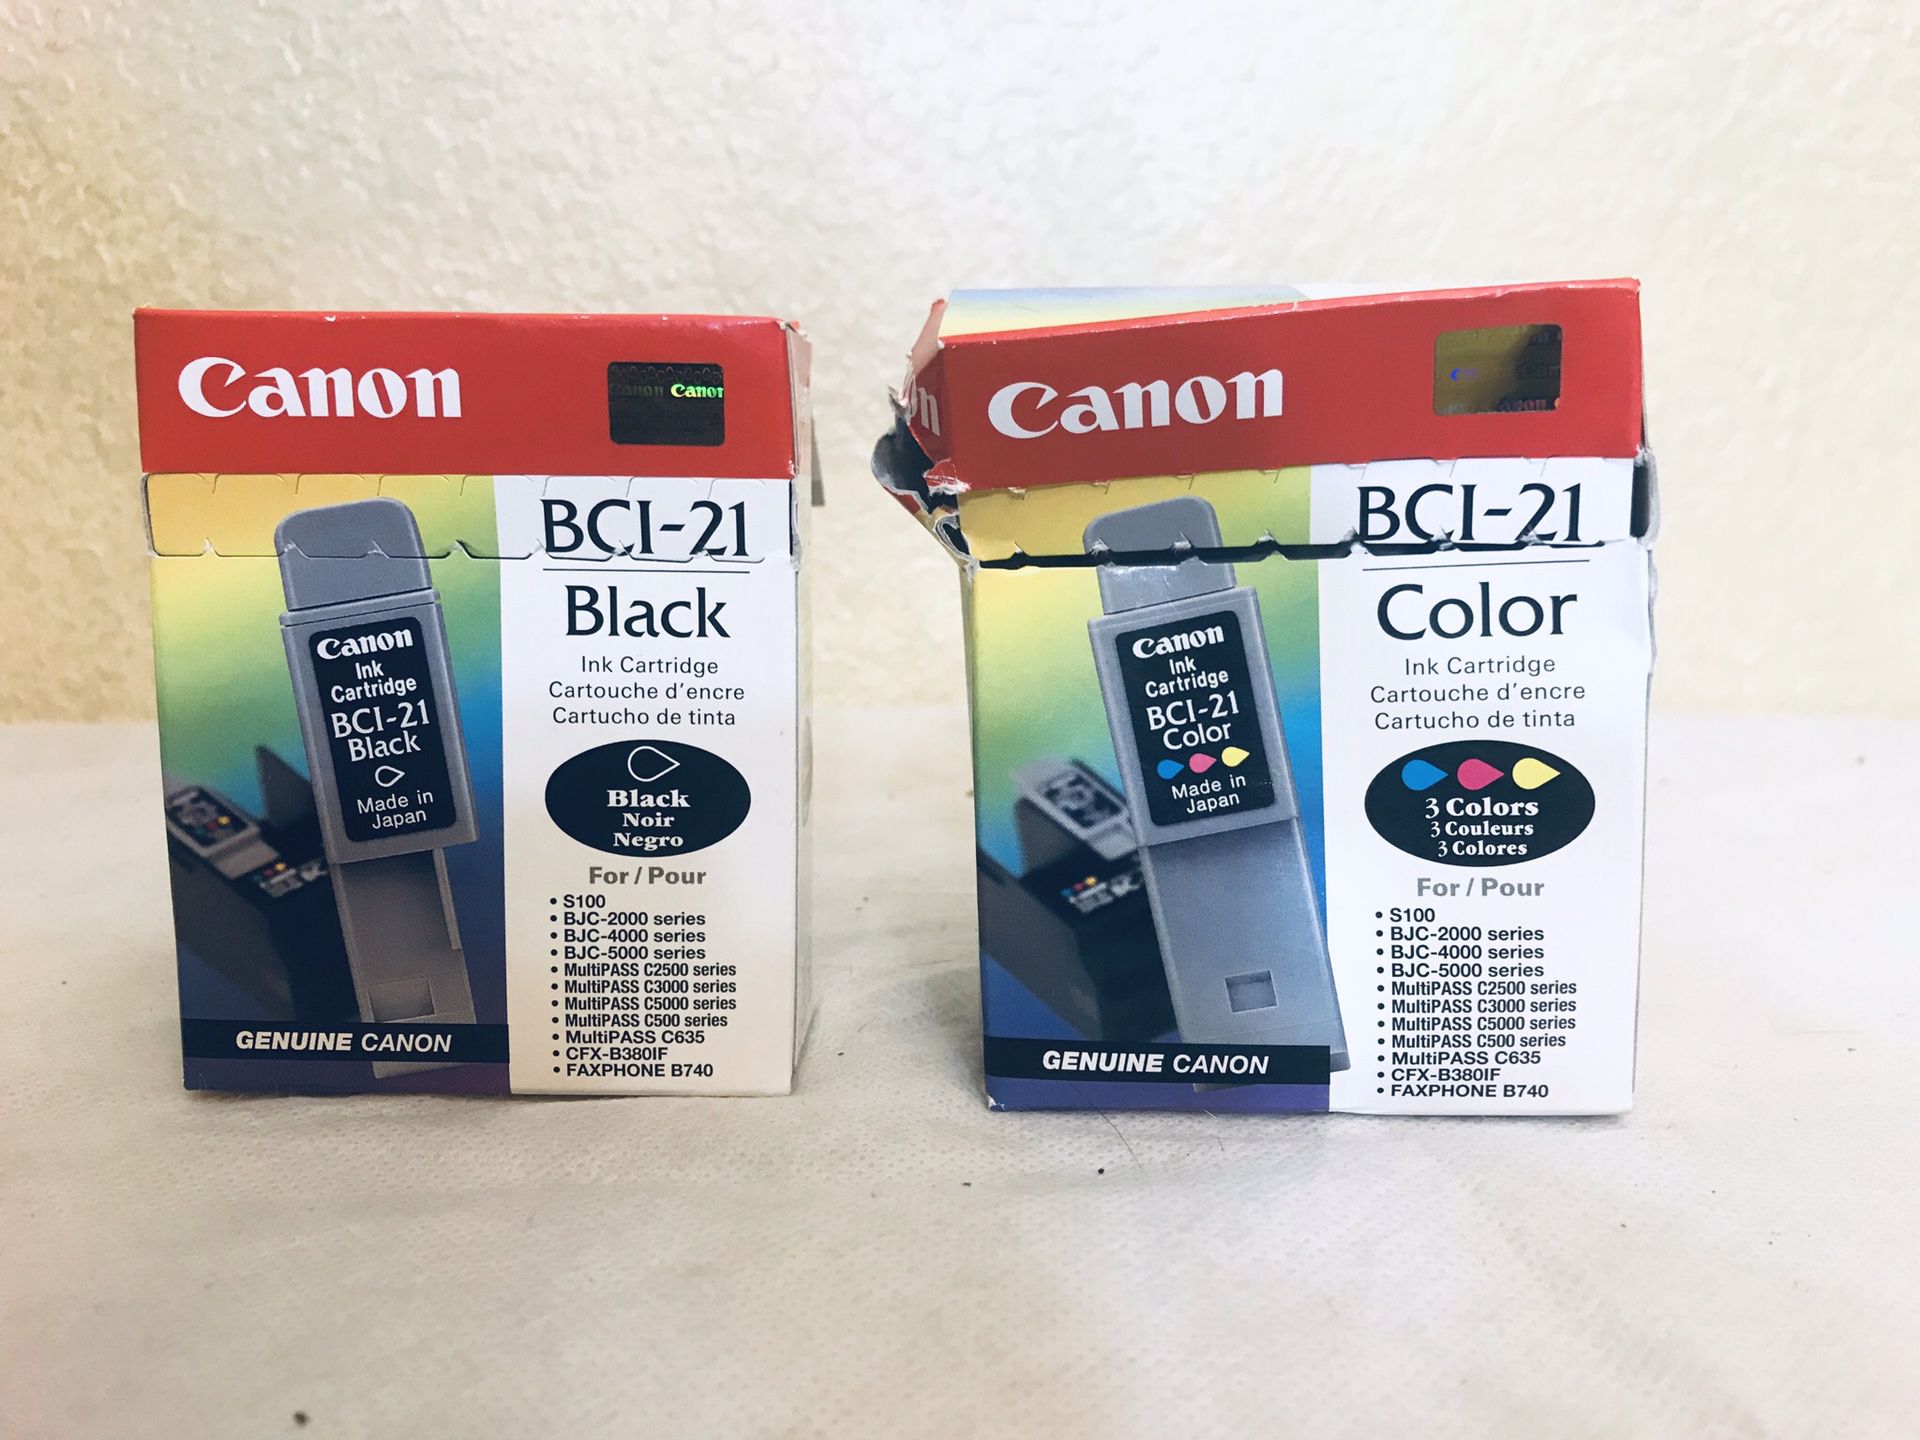 Canon BCI-21 Black & Color Printer Ink Cartridges for Sale in